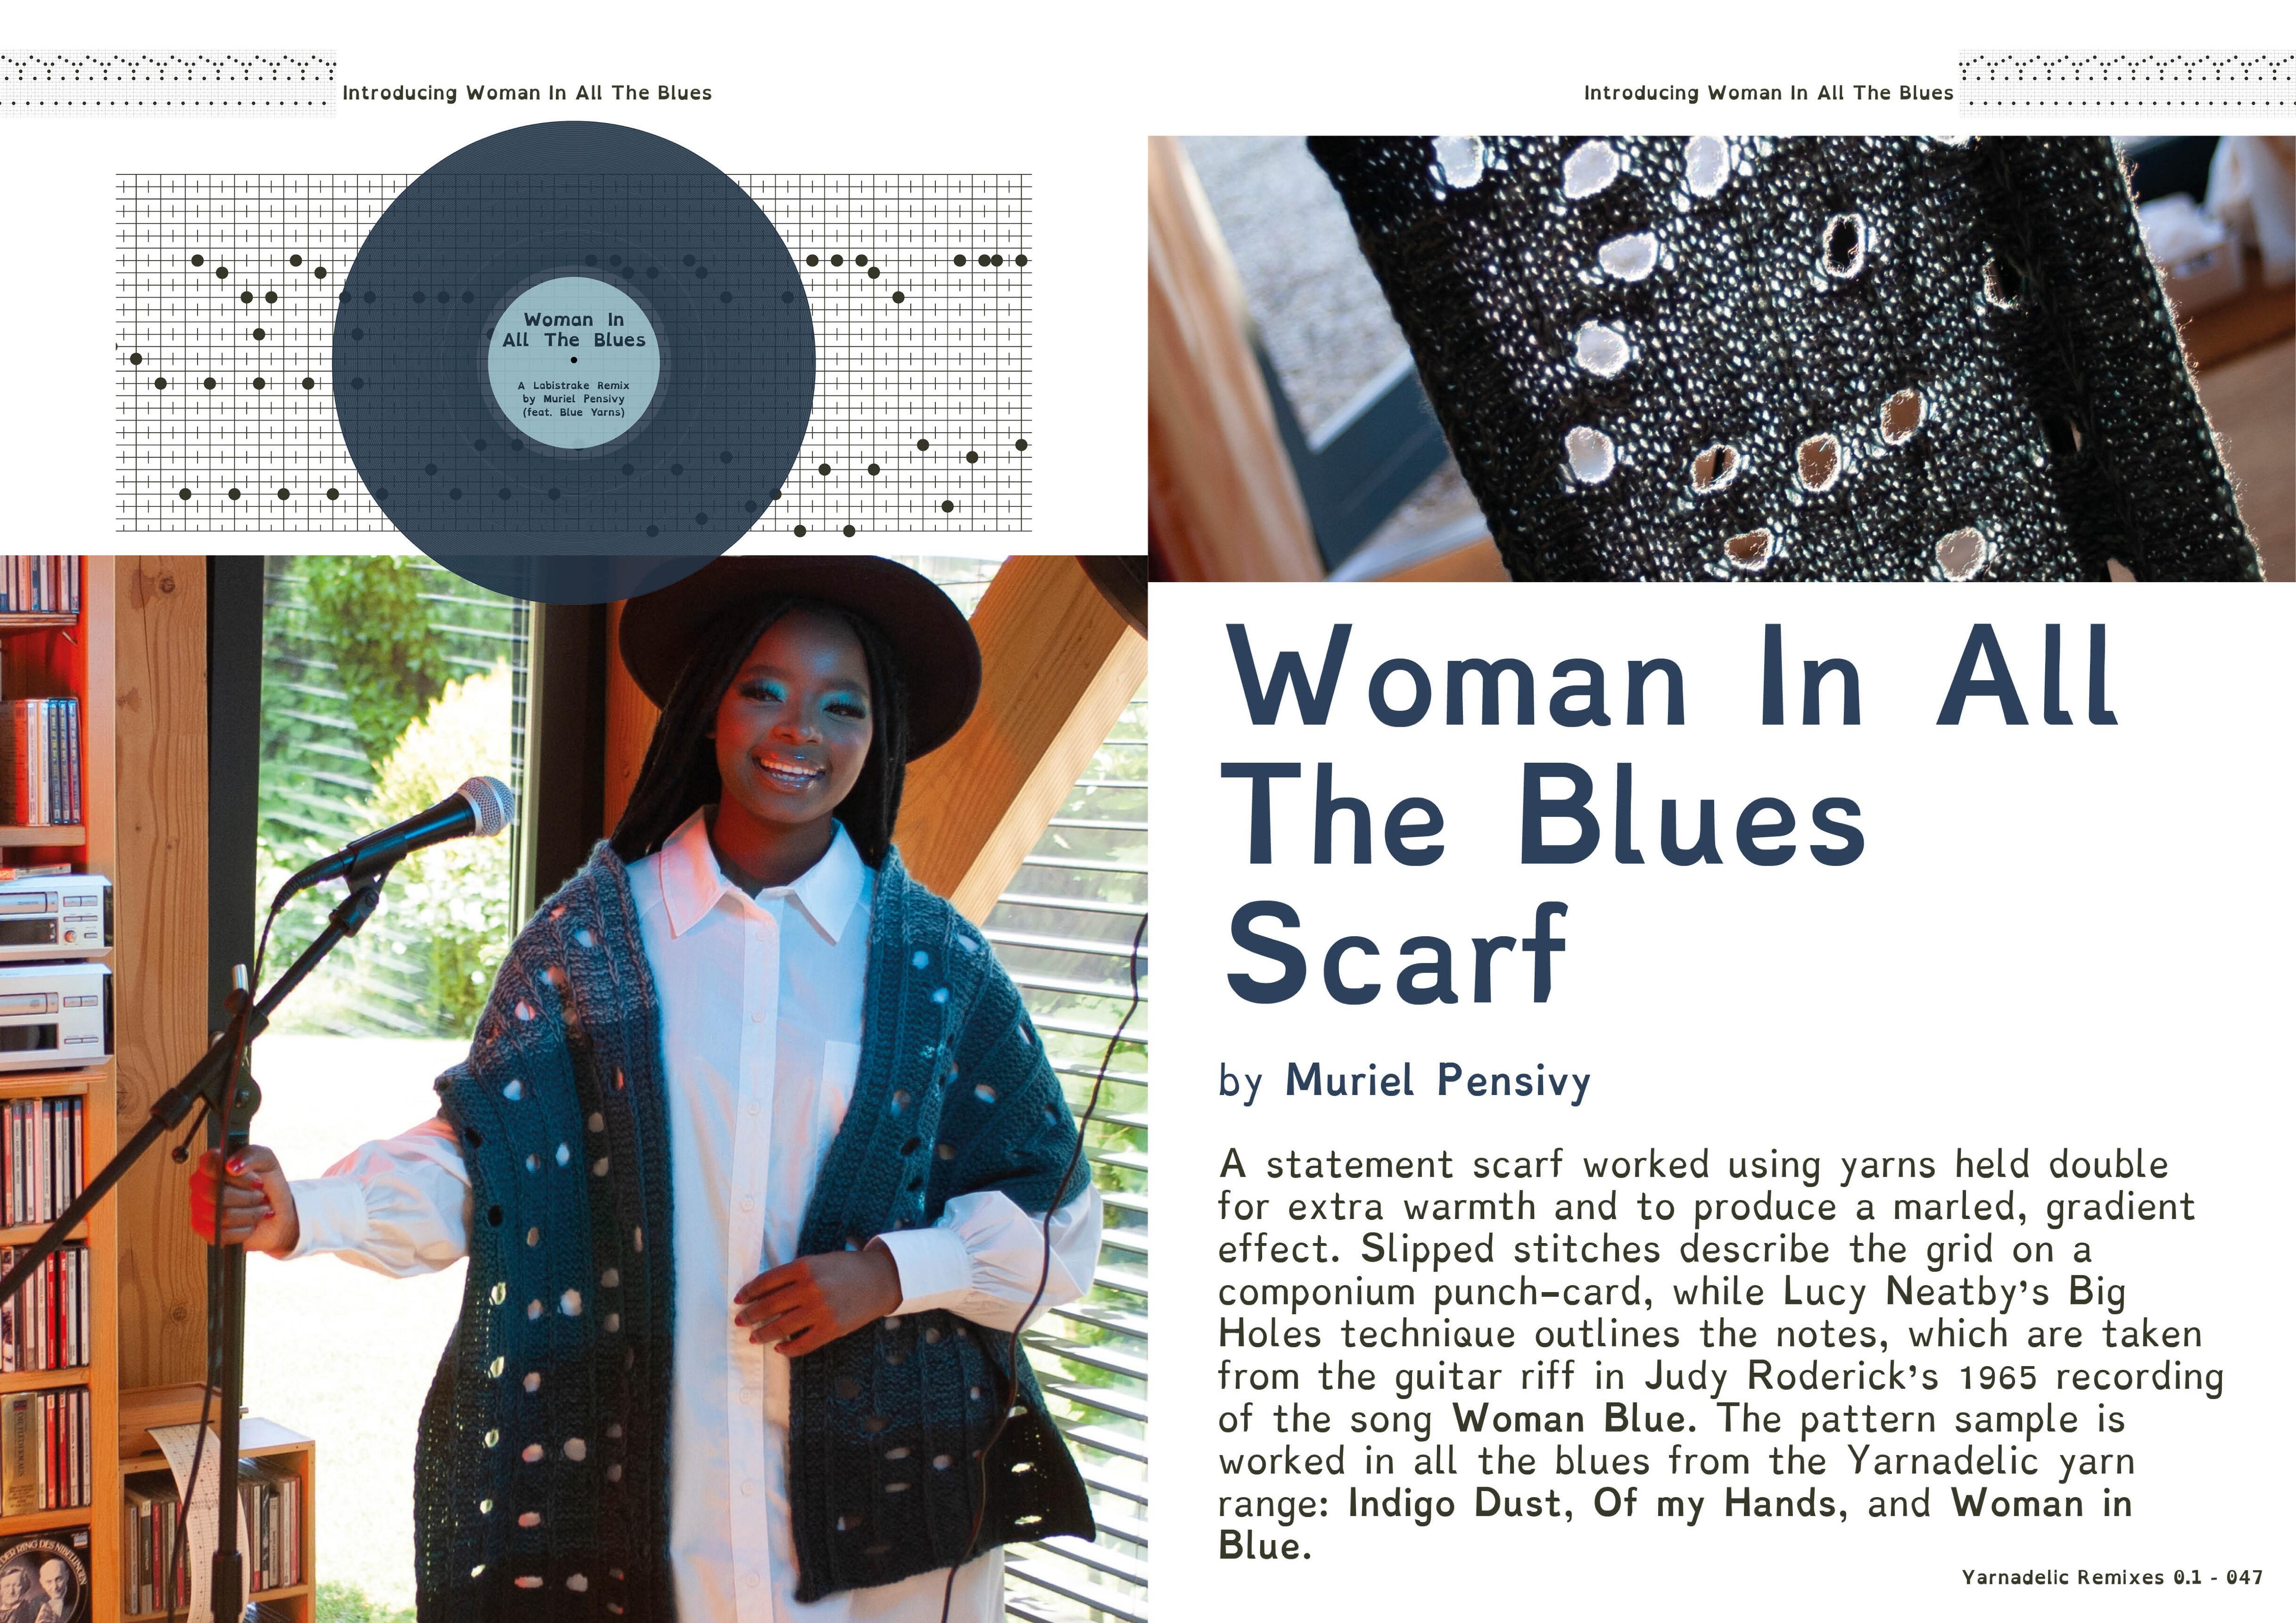 Yarnadelic Remixes 0.1 - spread introducing Woman In All The Blues Scarf